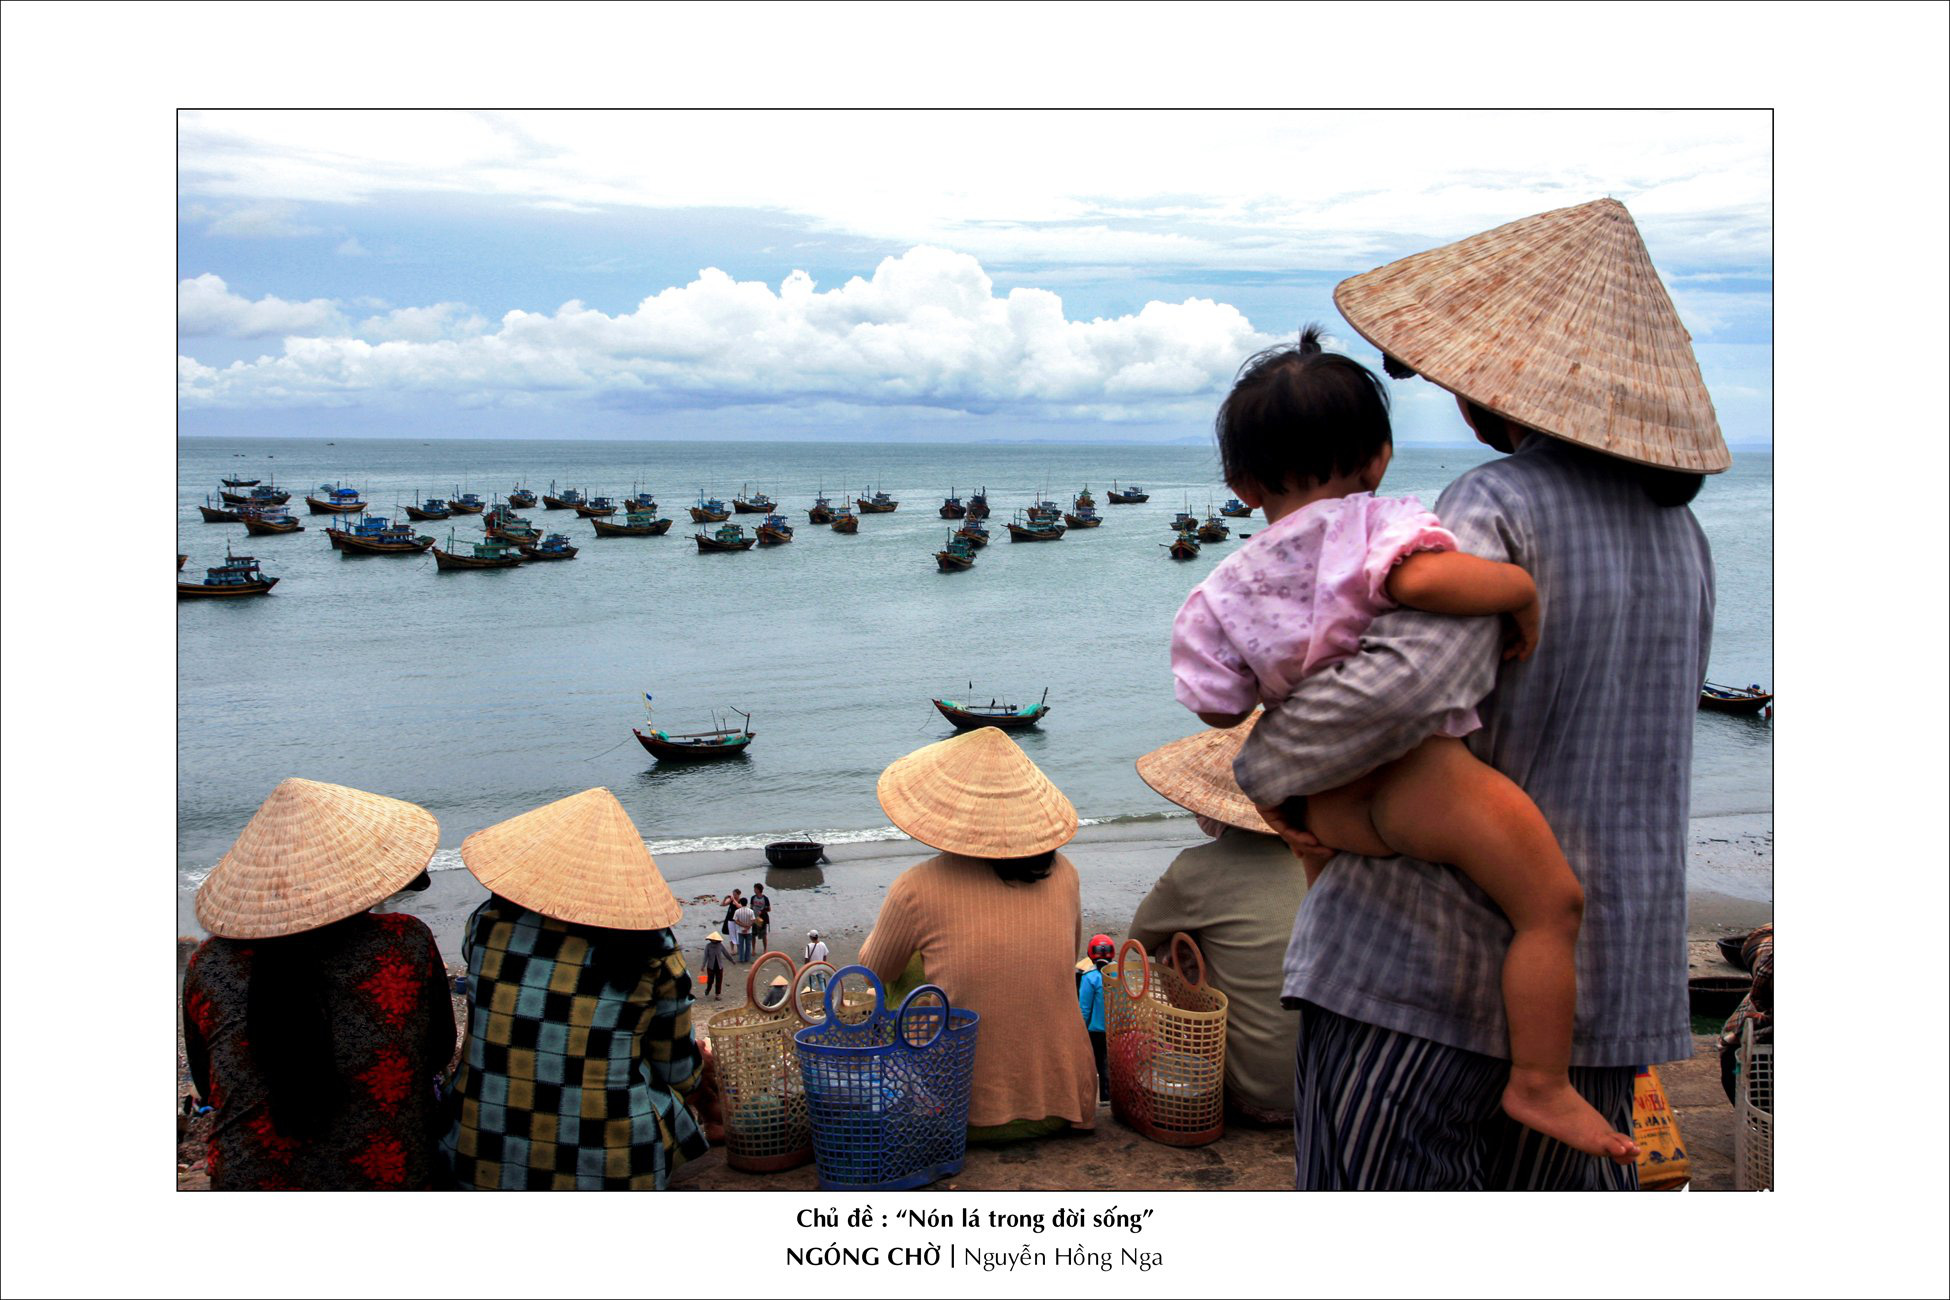 Women wearing ‘non la’ await a fishing boat’s returning to port in this photo on display at the Ho Chi Minh City Photography Association (HOPA) headquarters.